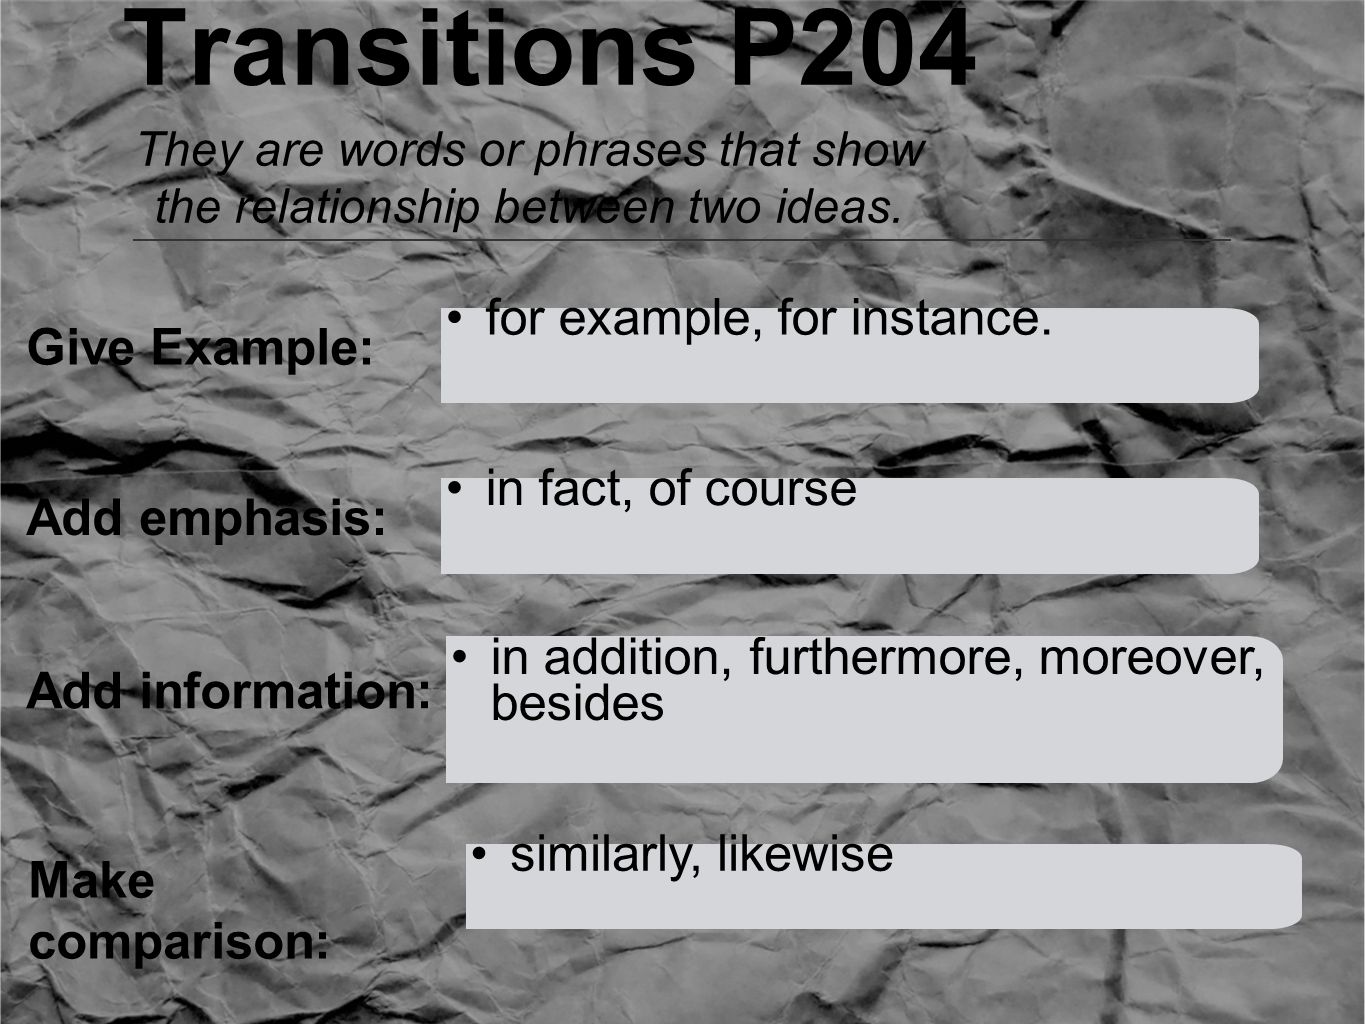 Transitions P204 Give Example: for example, for instance.